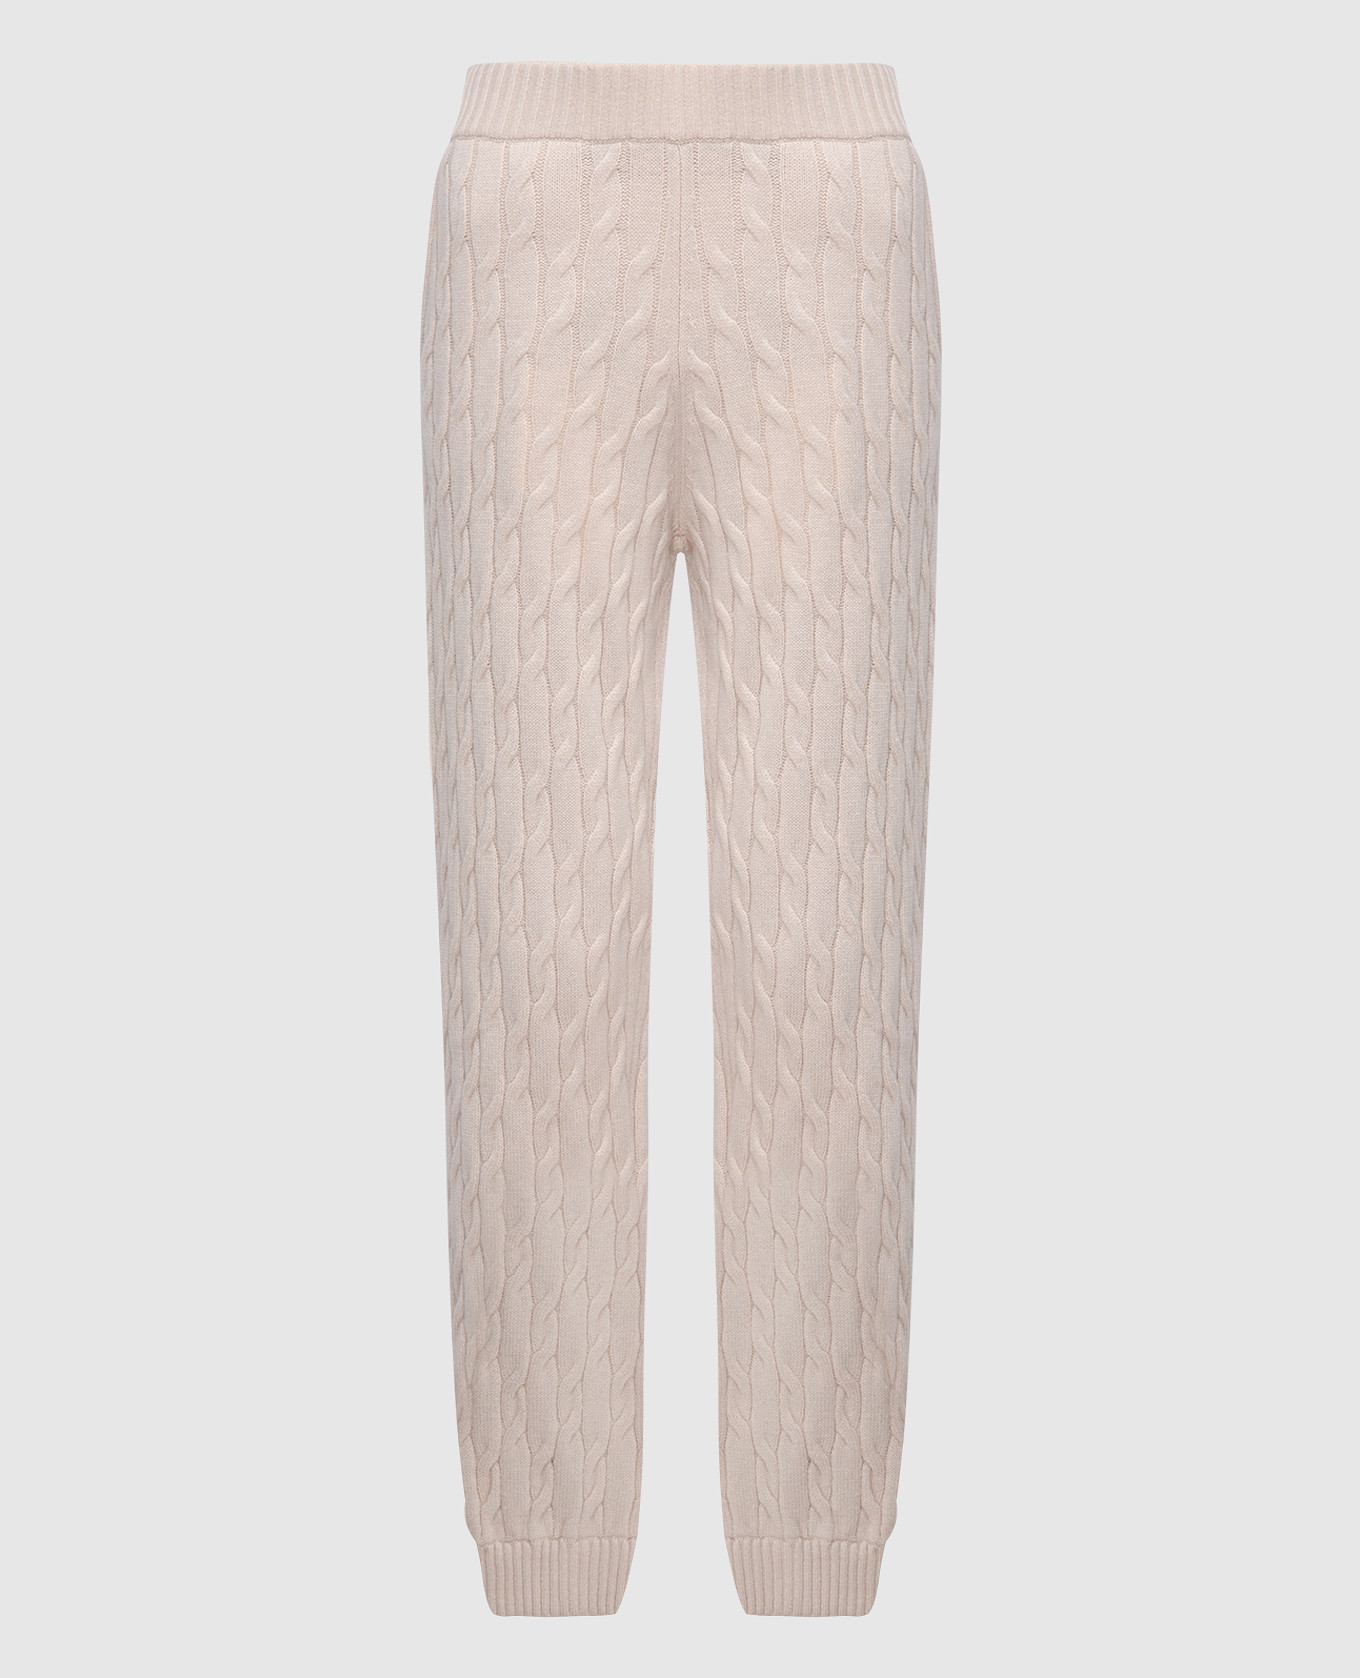 Beige joggers made of wool in a textured pattern